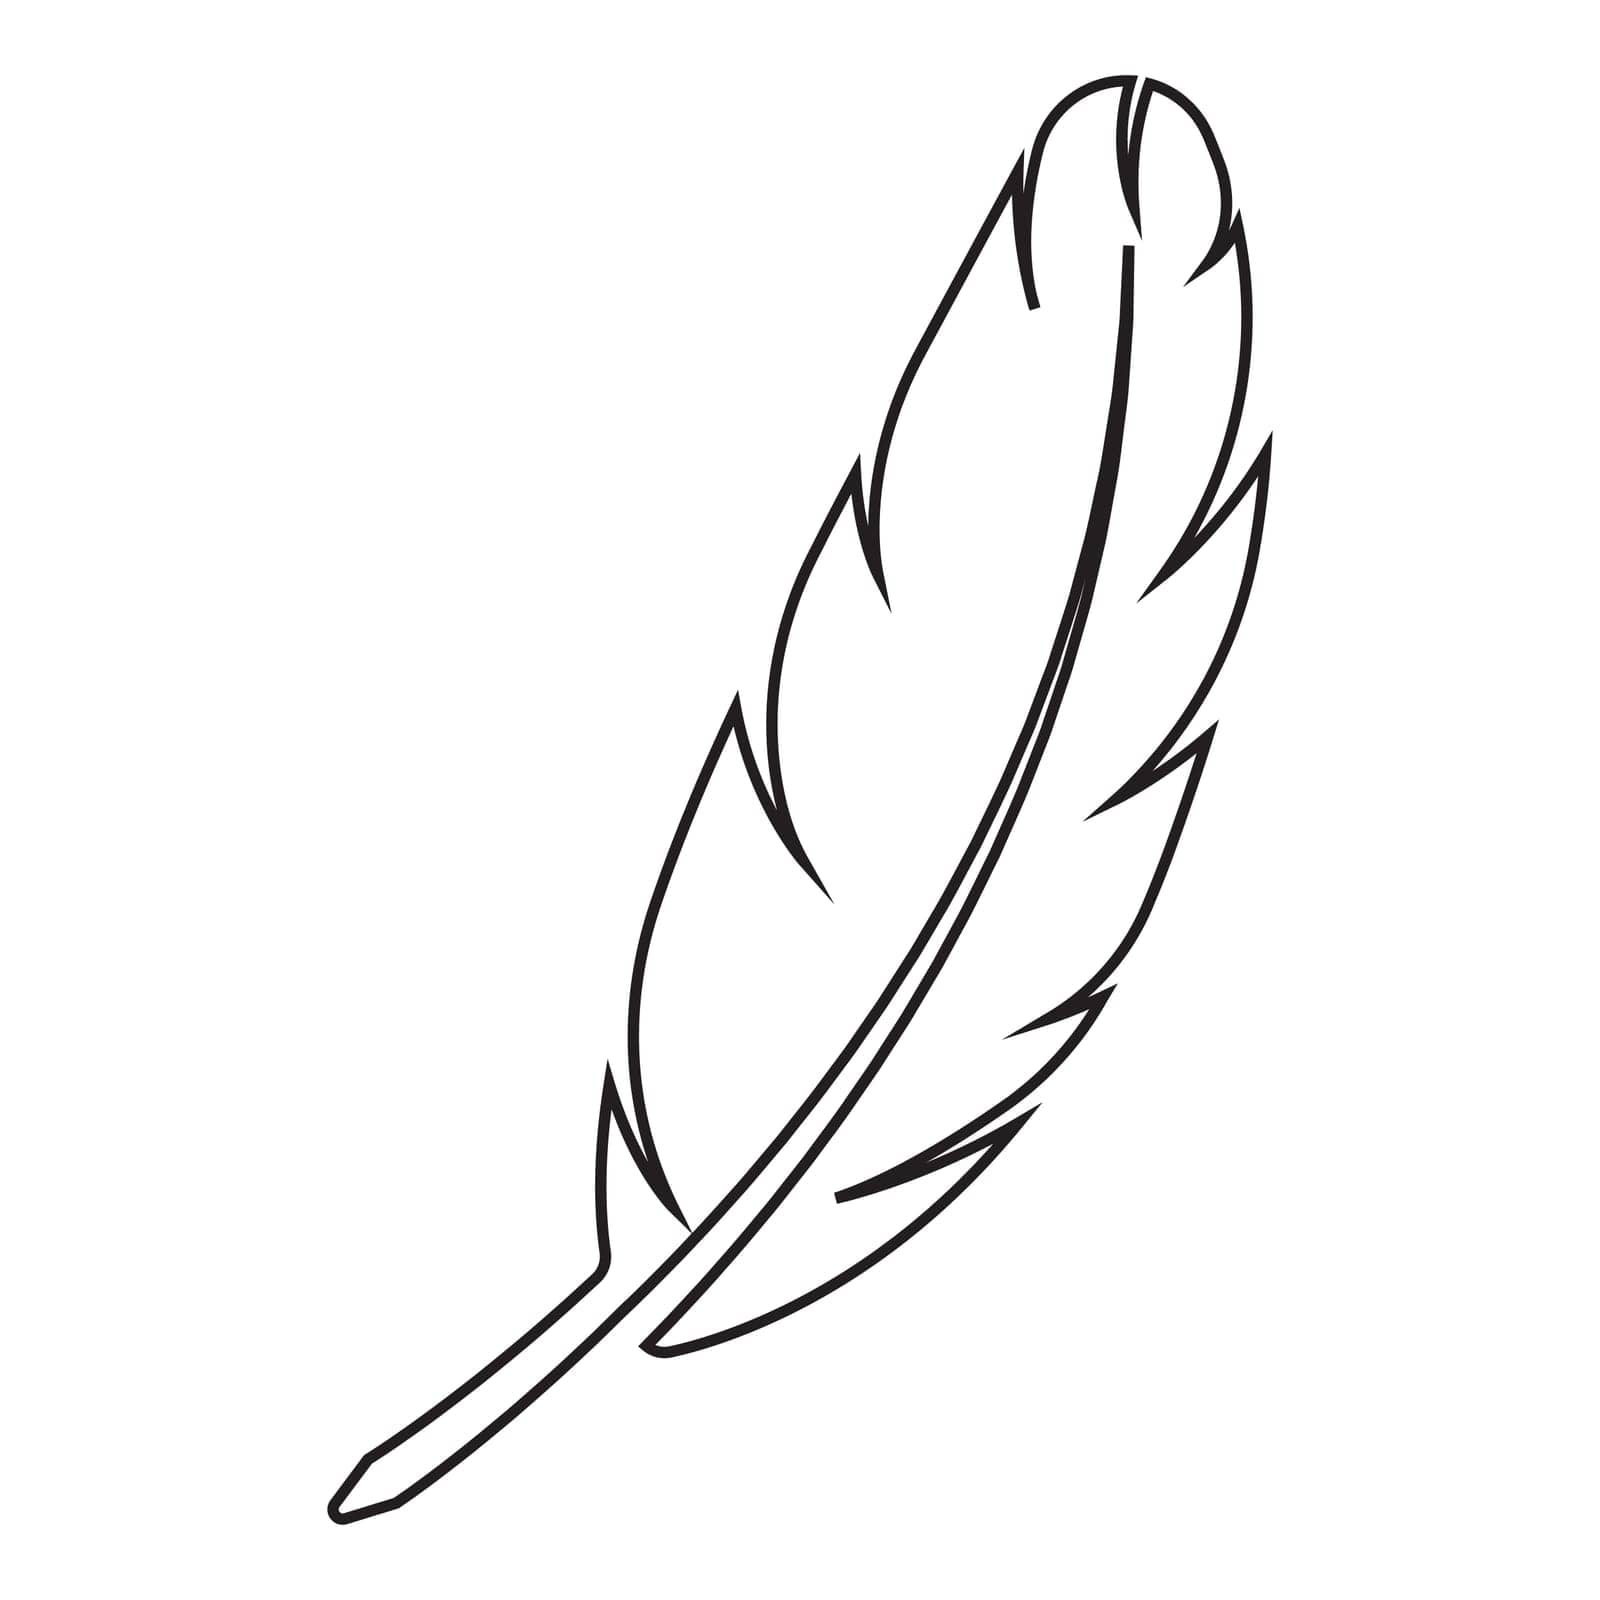 Quill pen logo by rnking